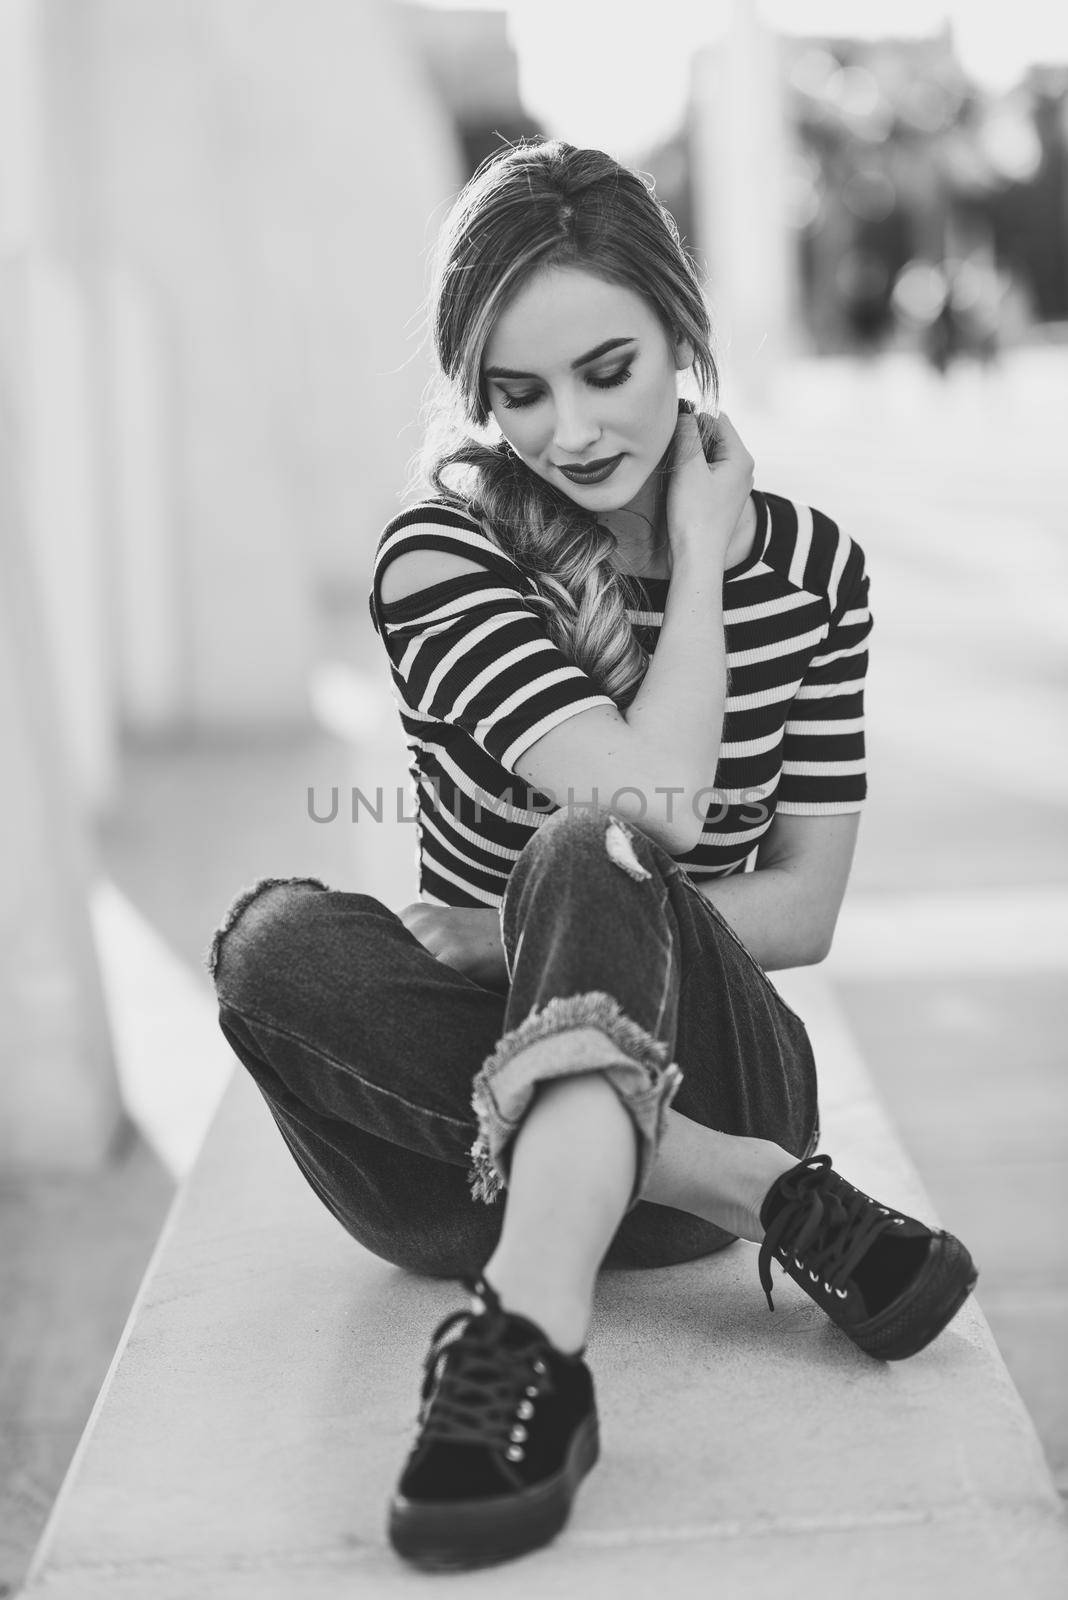 Blonde woman, model of fashion, sitting on a bench in urban background with eyes closed. Thoughtful young girl wearing striped t-shirt and blue jeans in the street. Pretty russian female with pigtail.